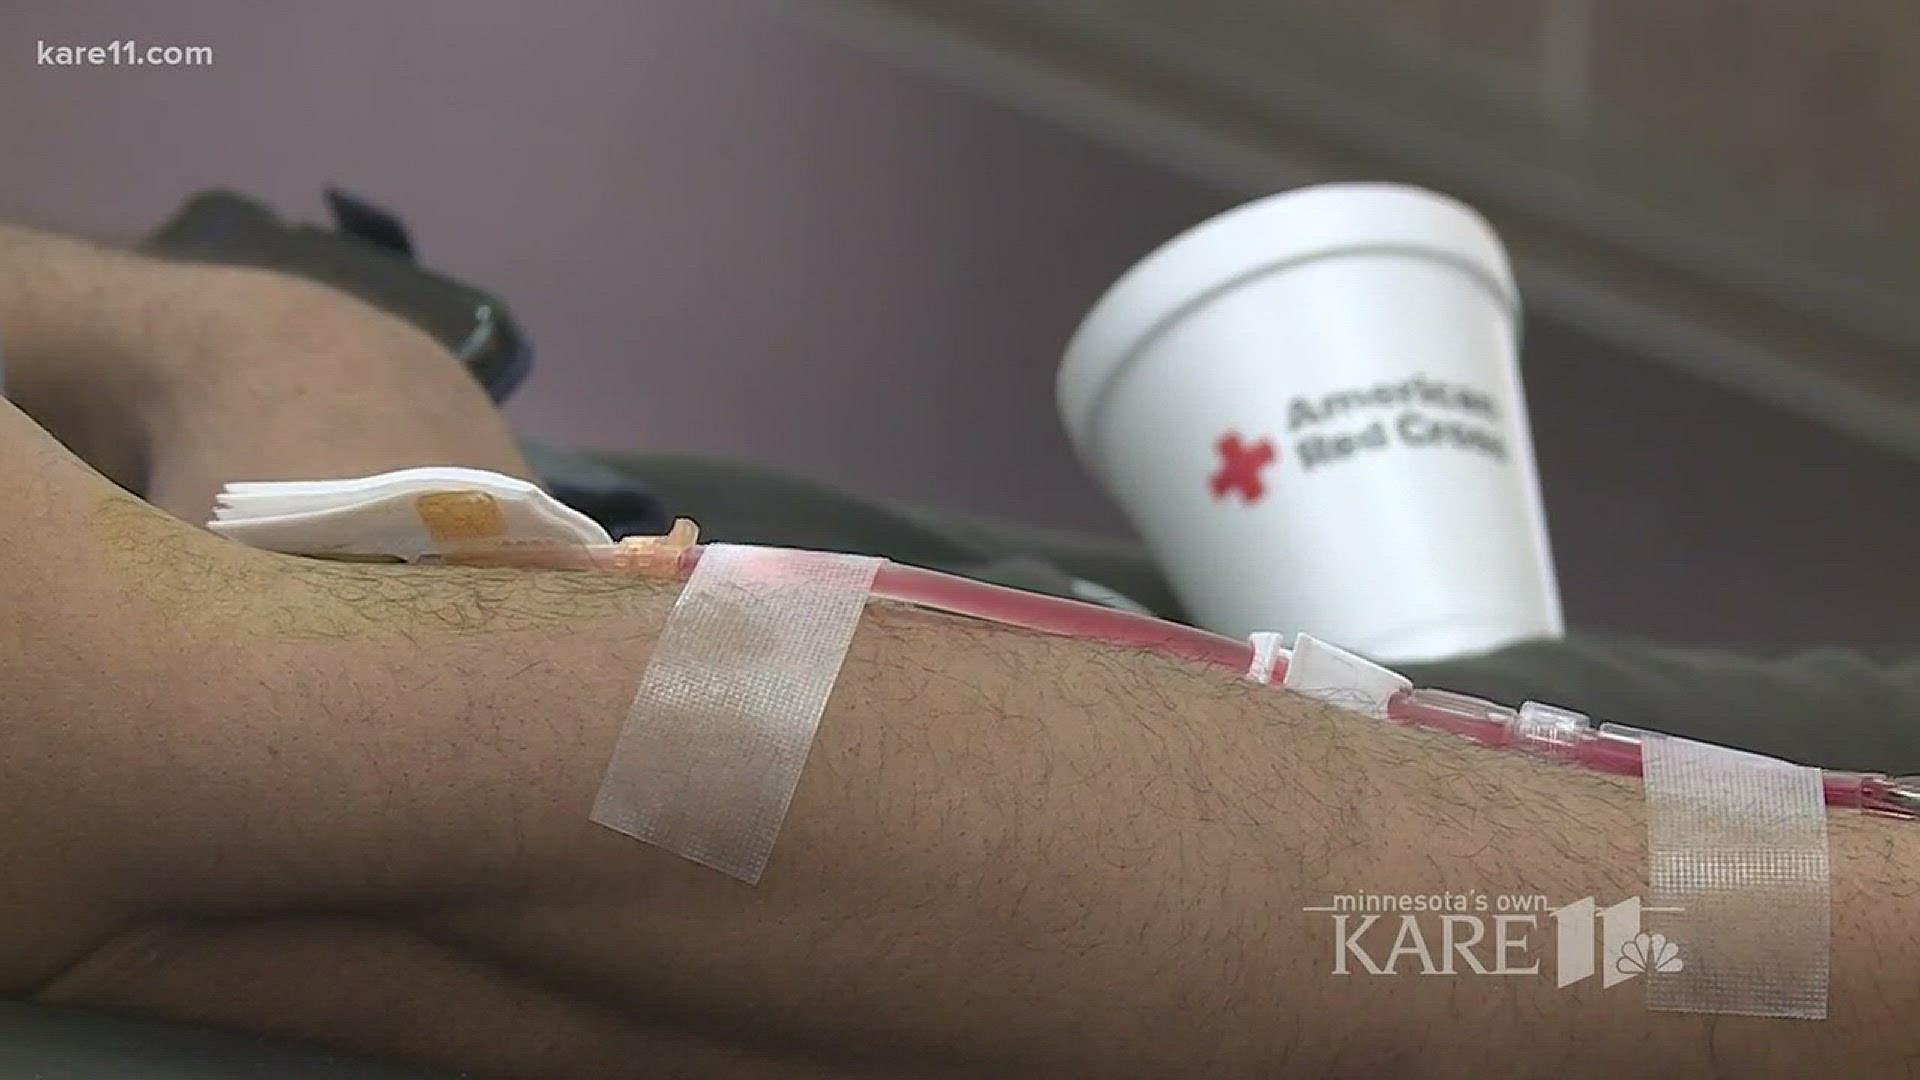 The American Red Cross on Monday expressed an urgent need for blood and platelet donors of all blood types to donate to help erase a significant winter blood shortage. http://kare11.tv/2m8NTBR